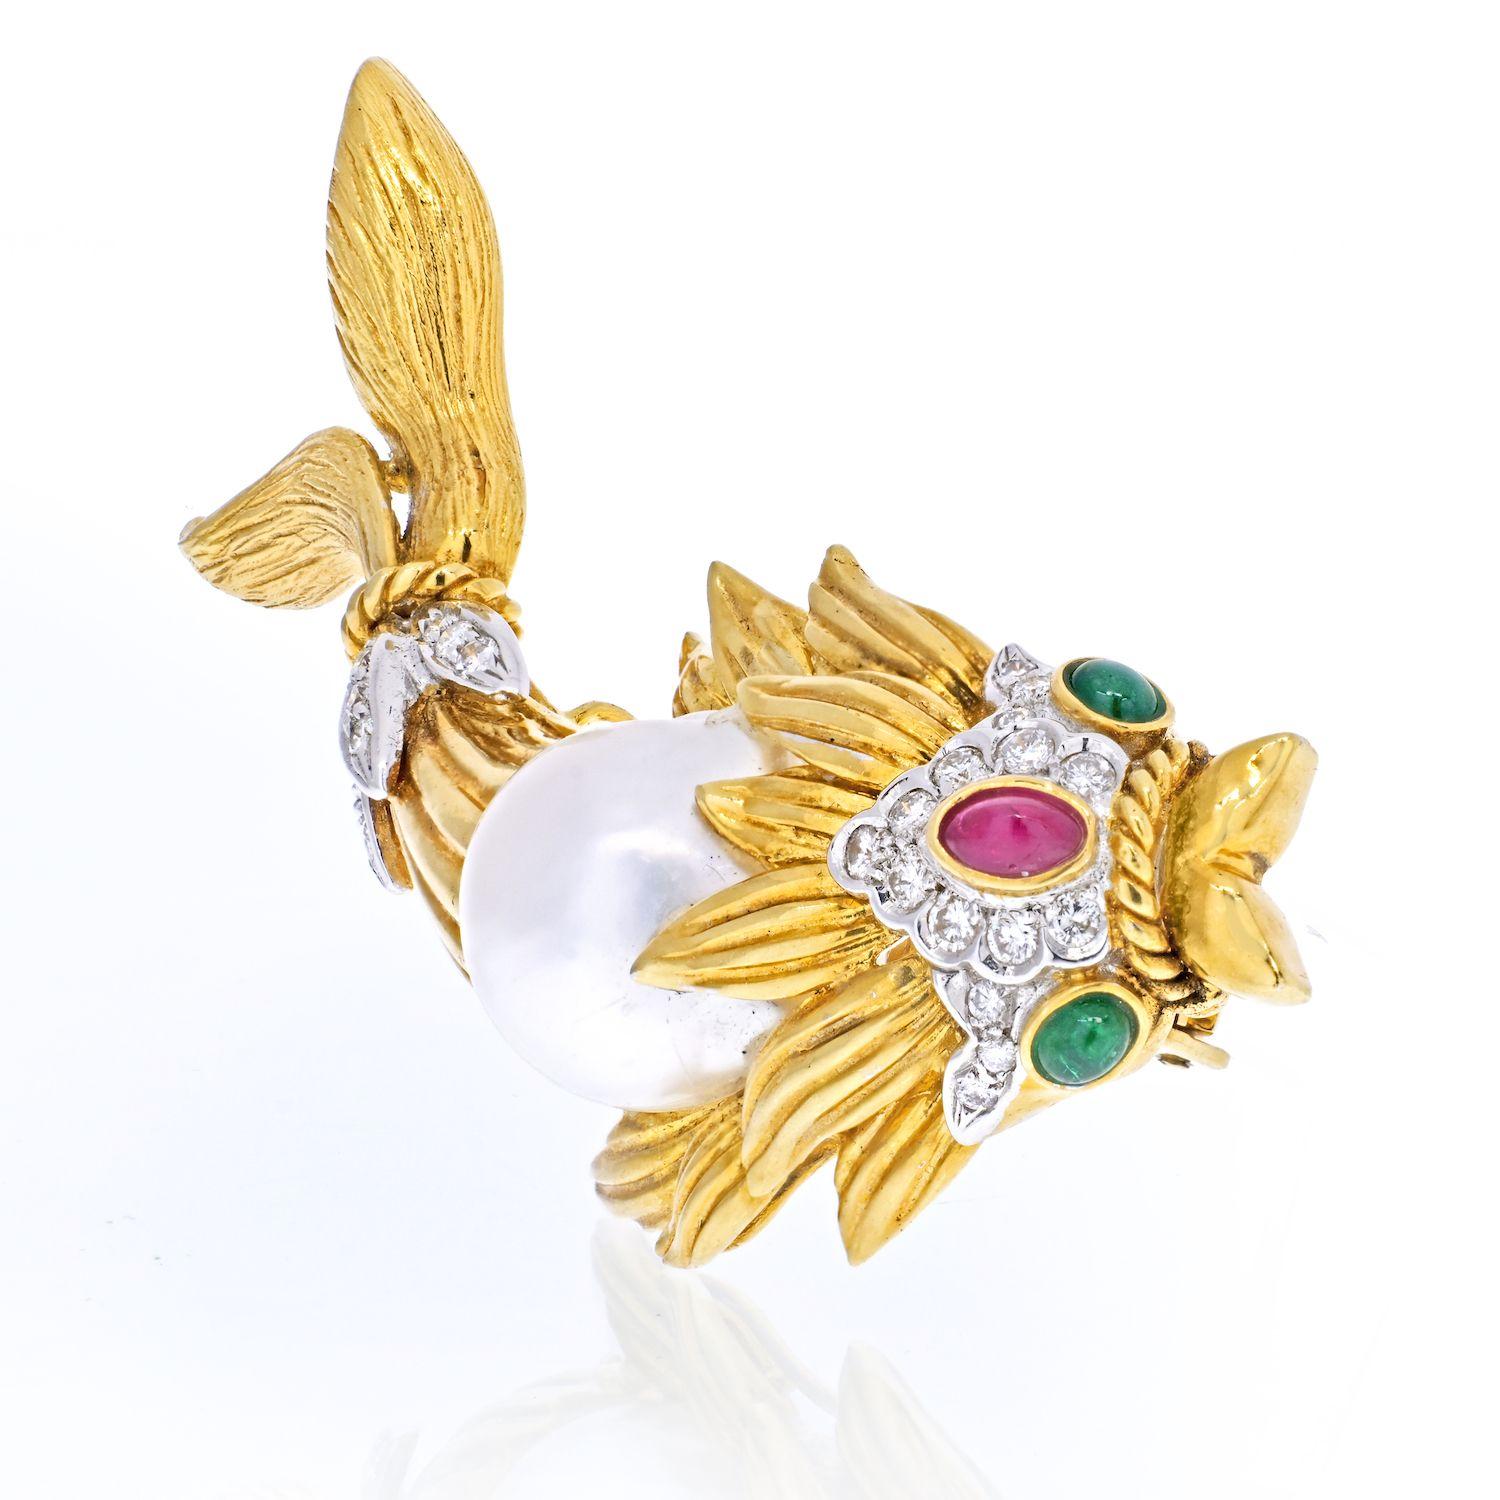 An embellished koi fish pin brooch features a cultured pearl, accented with round diamonds, a ruby and two cabochon green emeralds as 